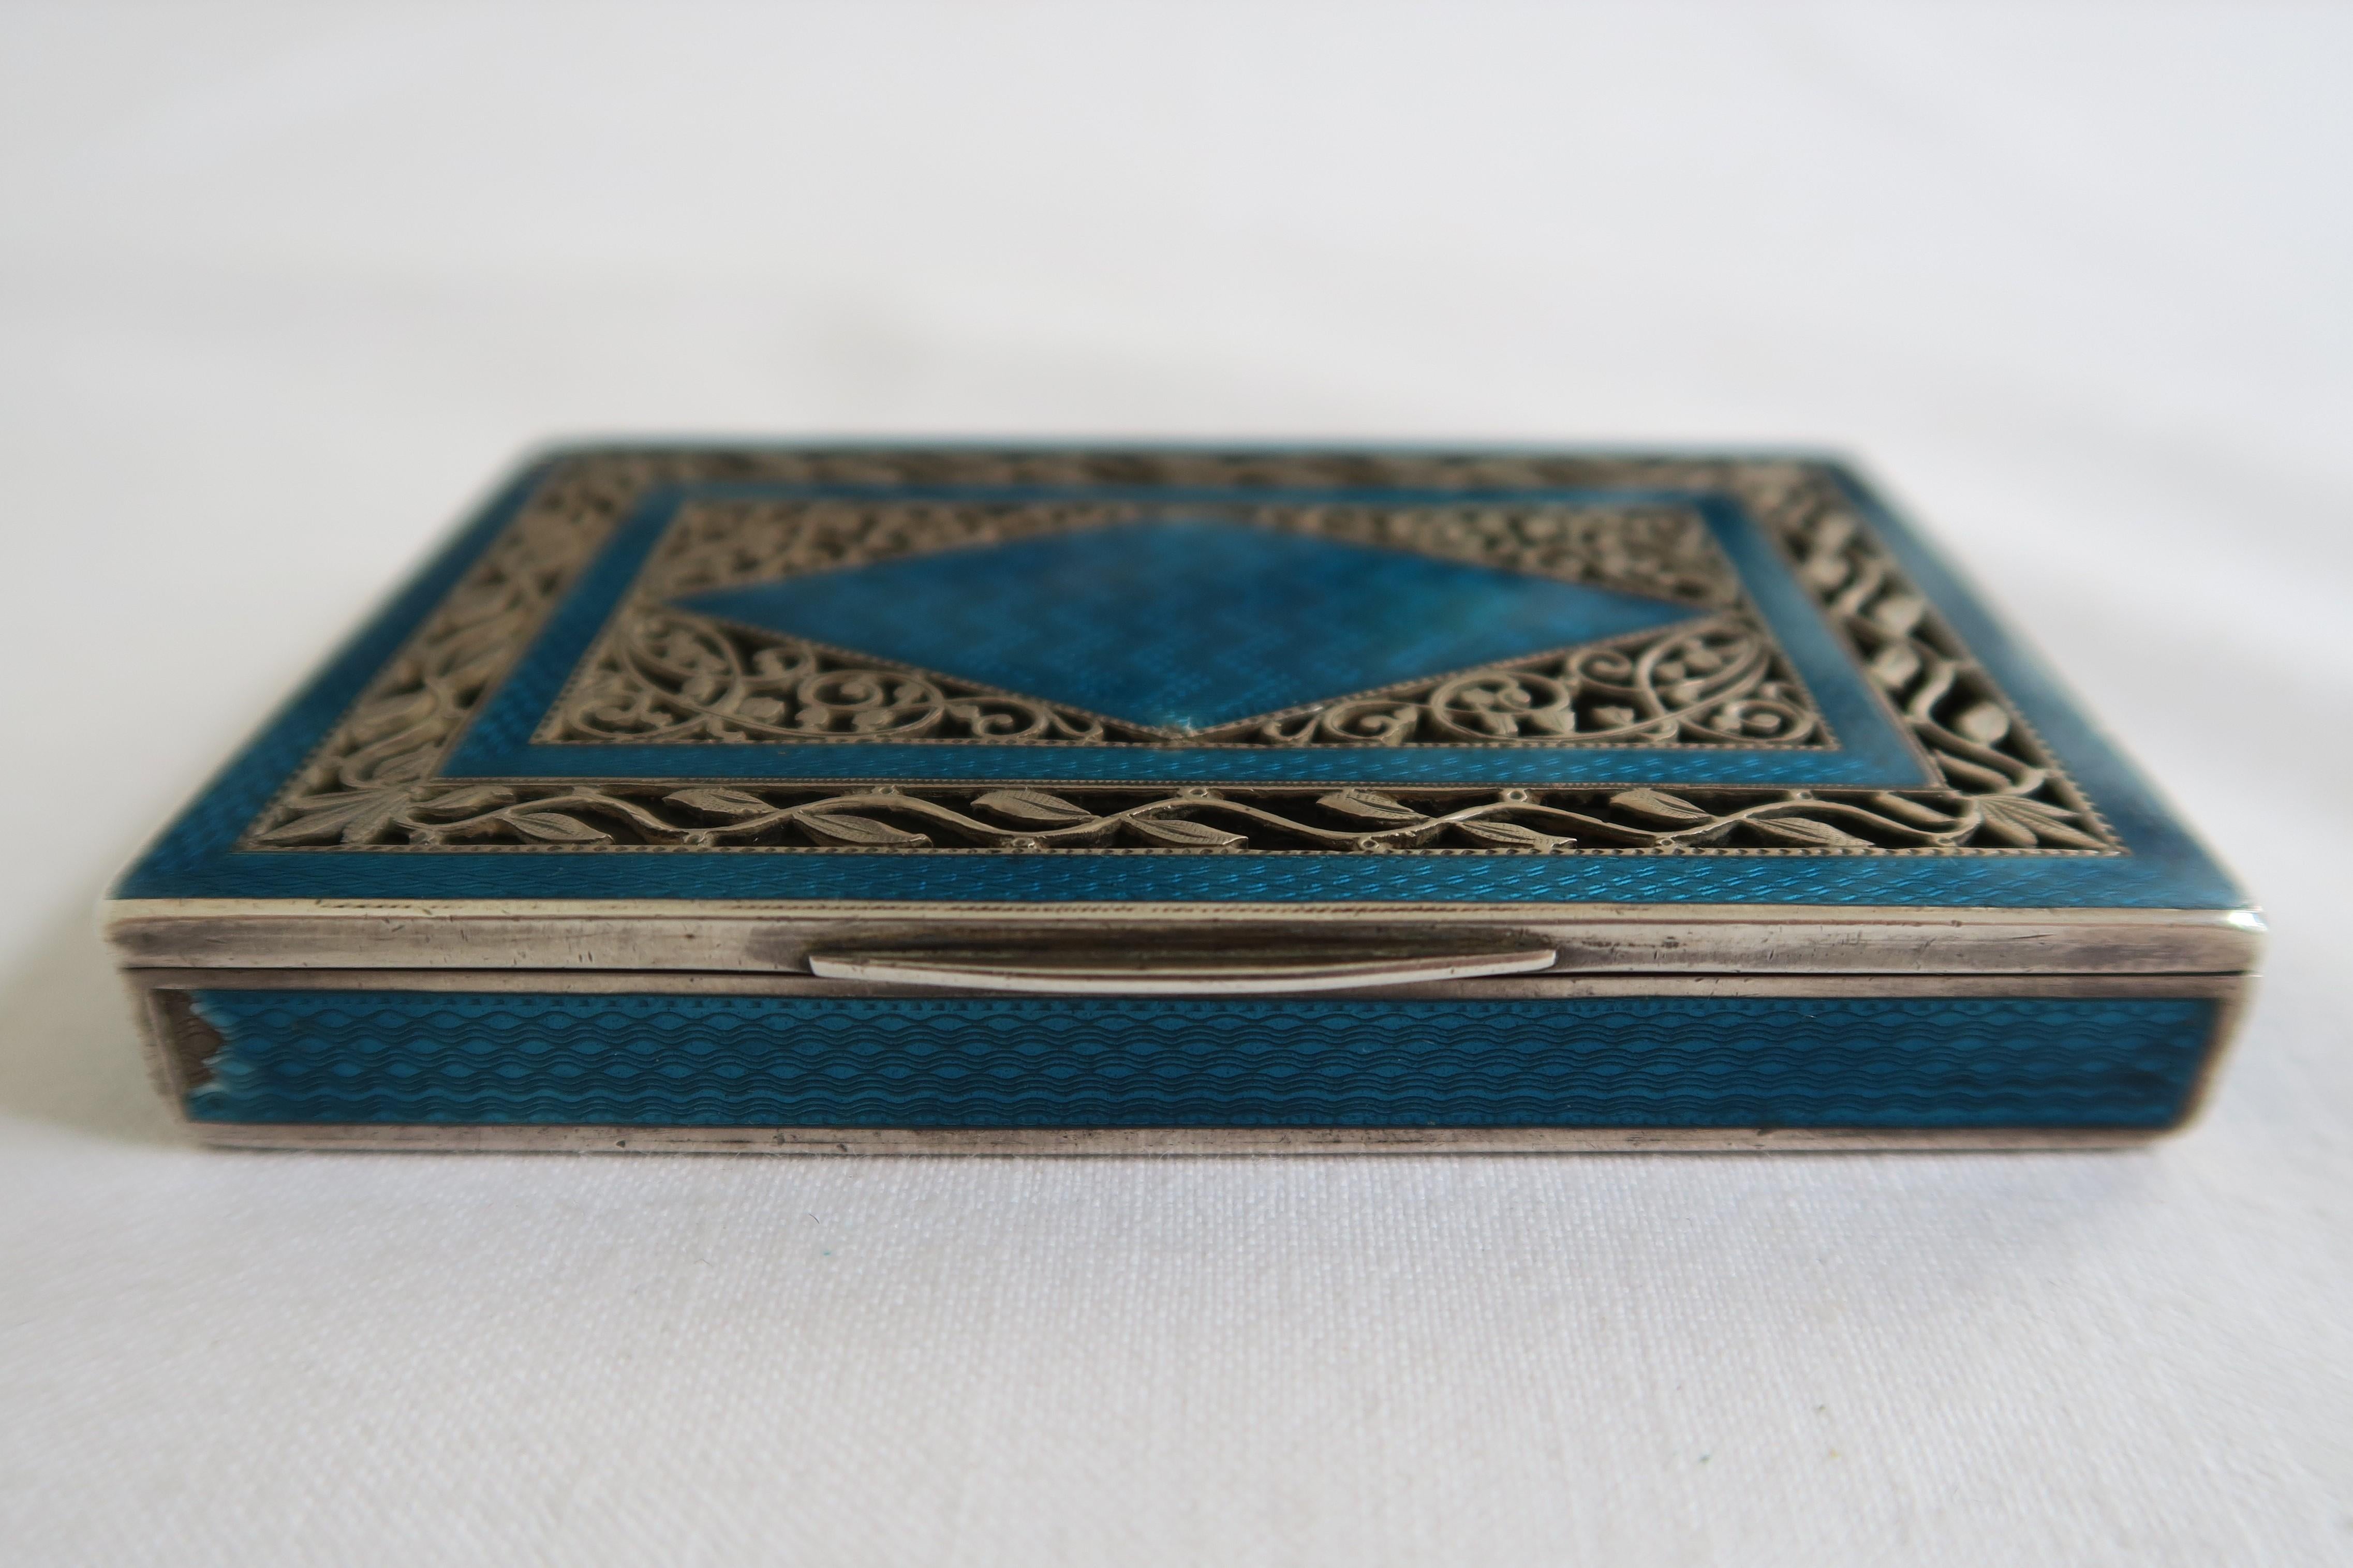 Austrian Antique Cigarette Box Silver and Turquoise Enamel with Lily of the Valley Motif For Sale